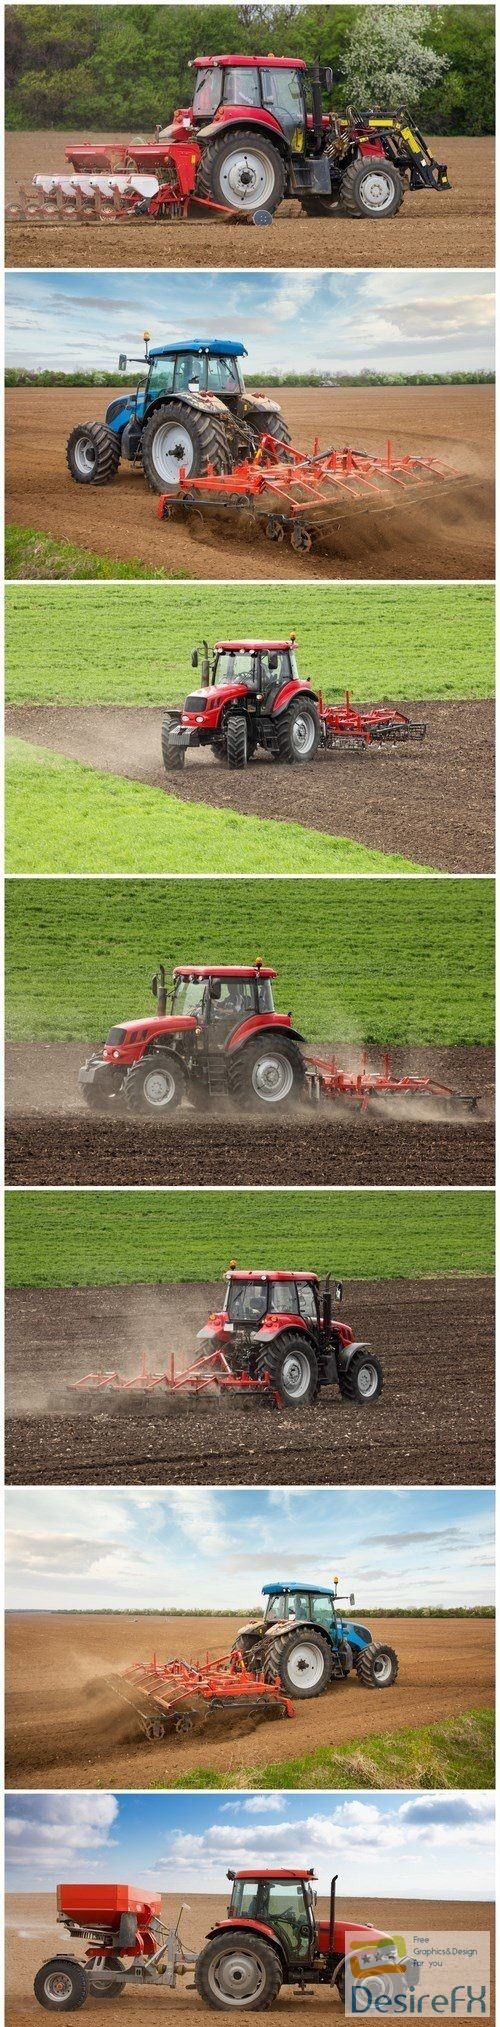 Small scale farming with tractor and plow in field – 7xUHQ JPEG Photo Stock